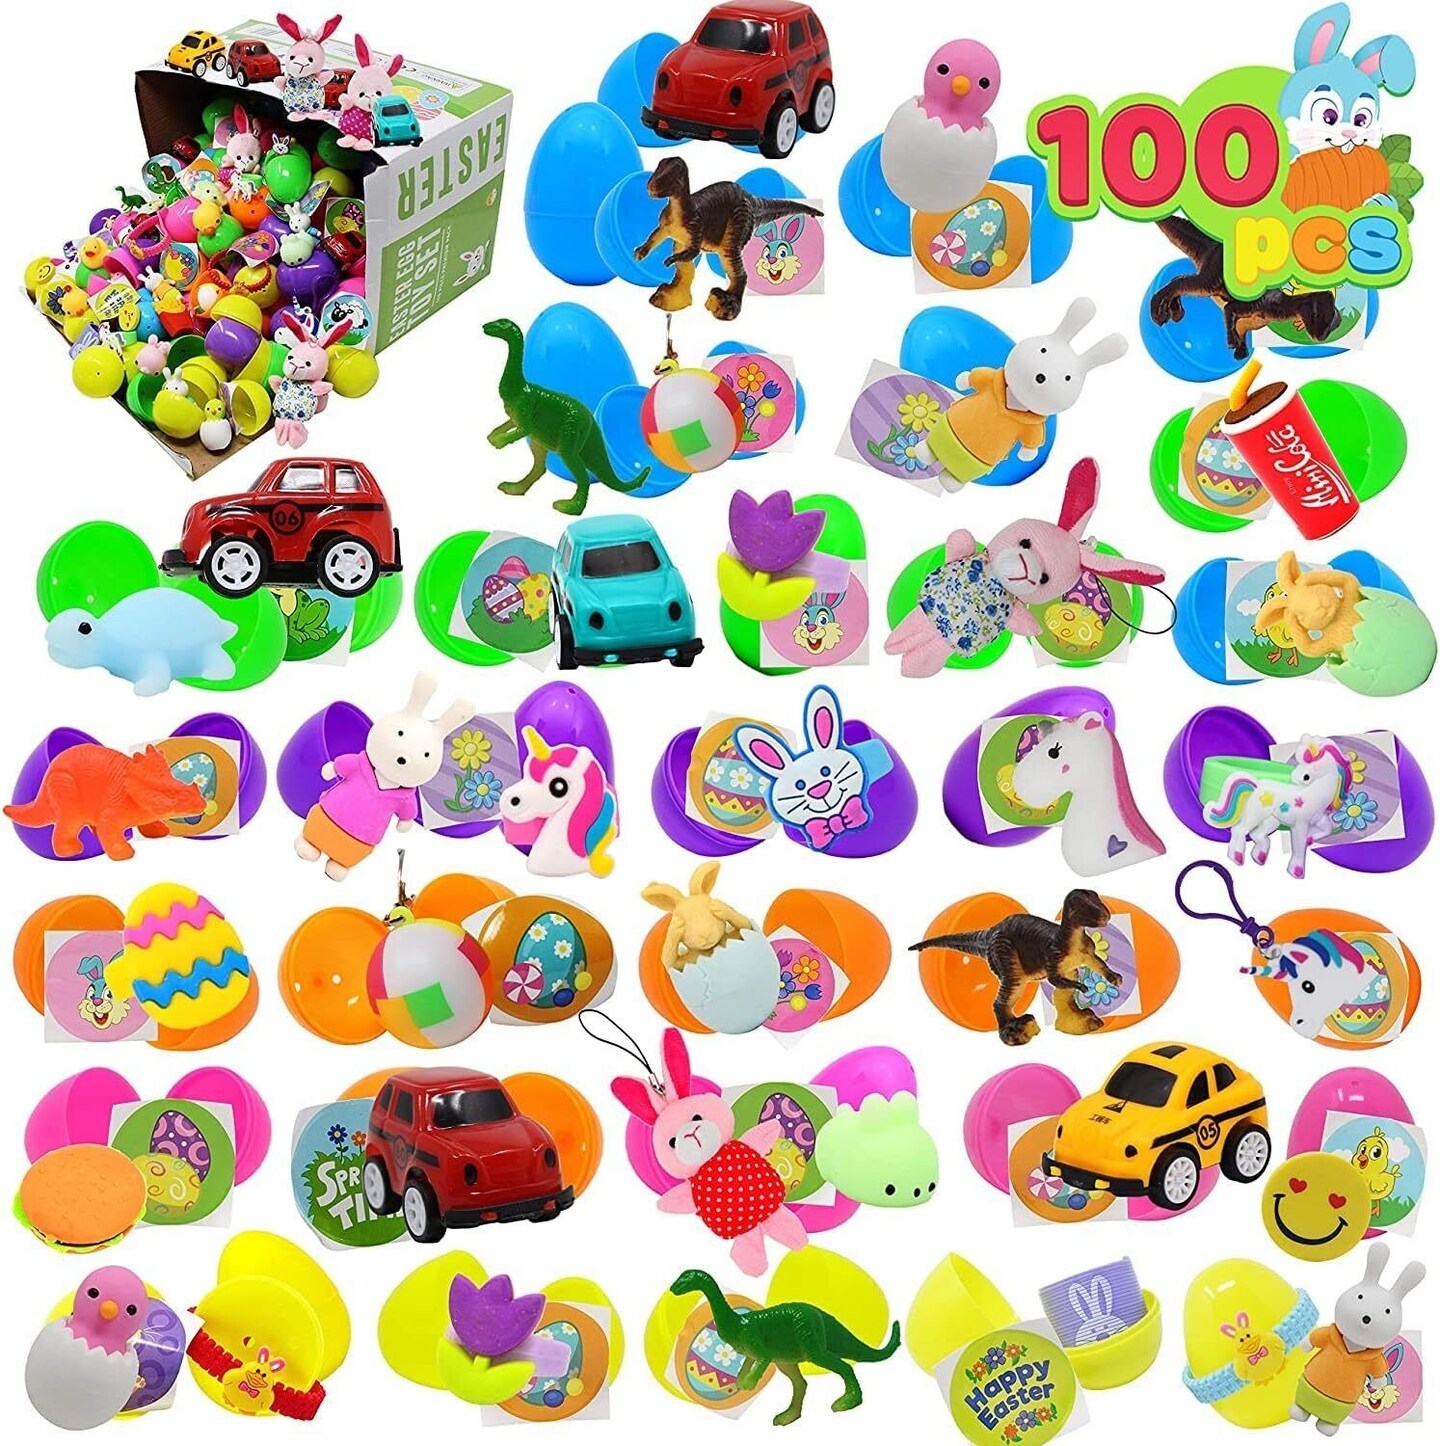 100 Pcs Prefilled Easter Eggs with Toys Party Favors Plus Stickers for Kids